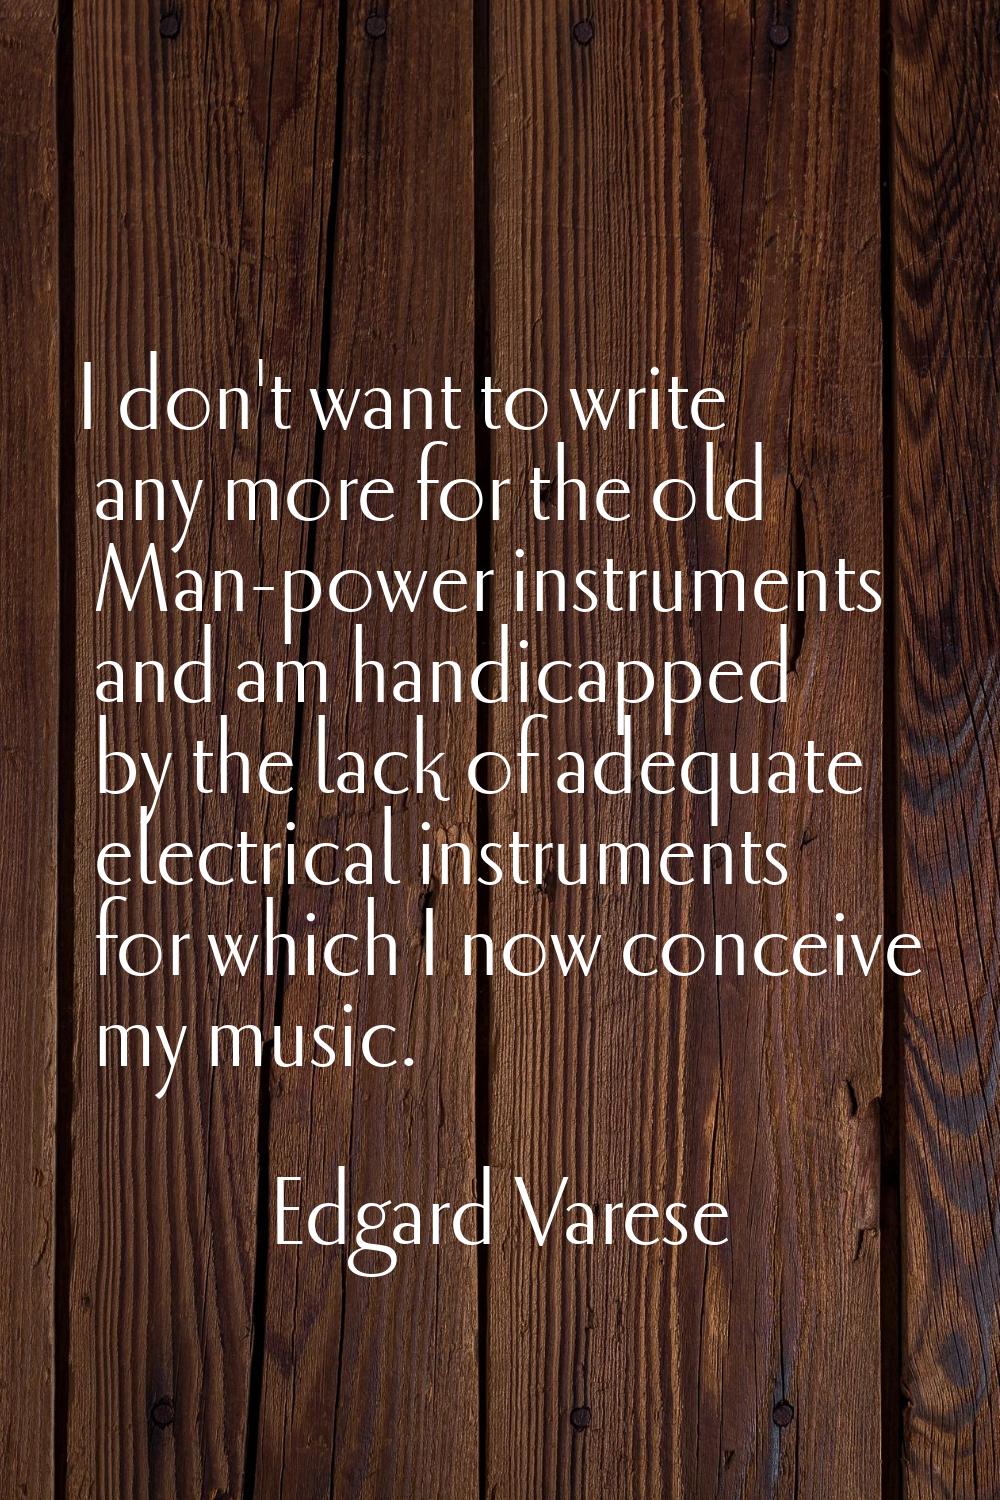 I don't want to write any more for the old Man-power instruments and am handicapped by the lack of 